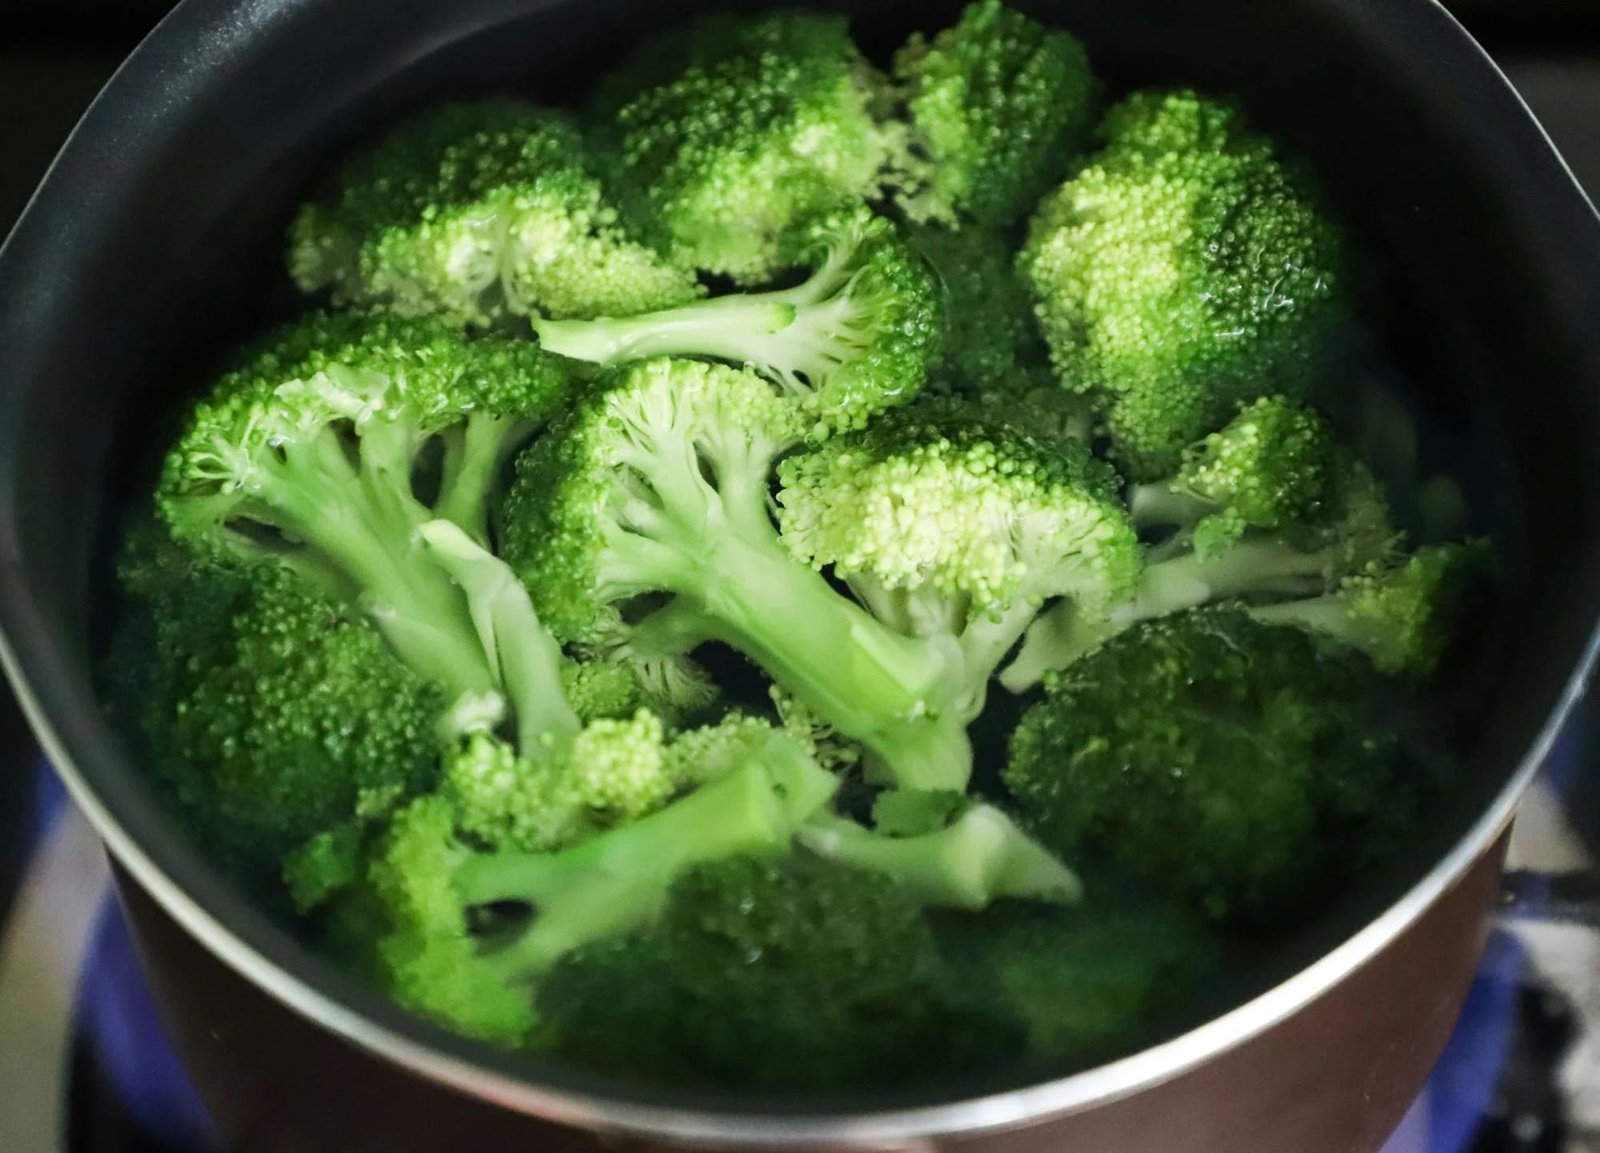 10 Reasons Why Broccoli is Considered a ‘Superfood’